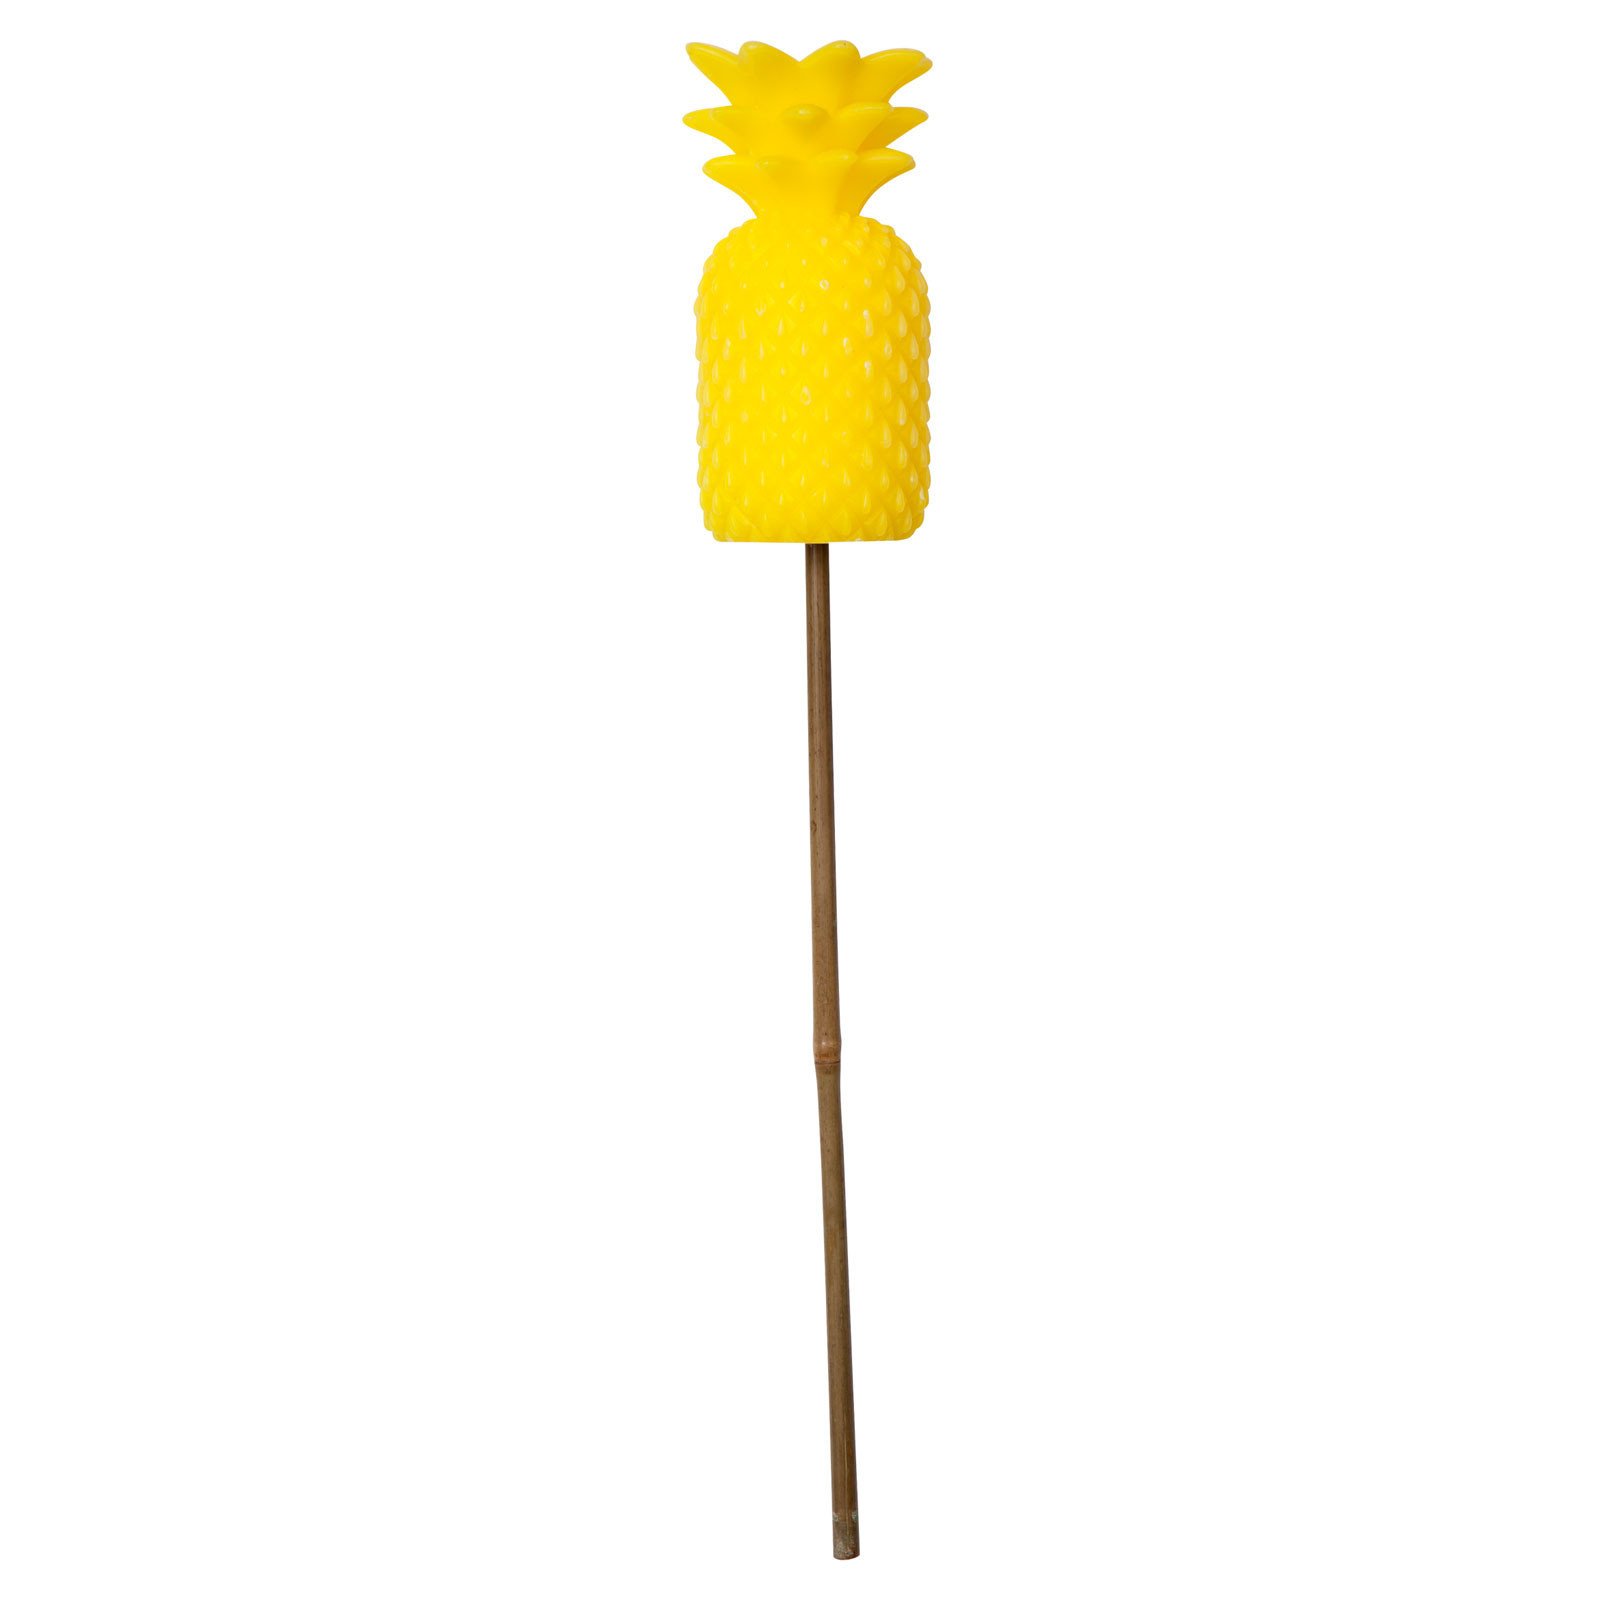 SUNNYLIFE Garden Candle - STAKE YOUR FLAME - Pineapple **Limited Stock**